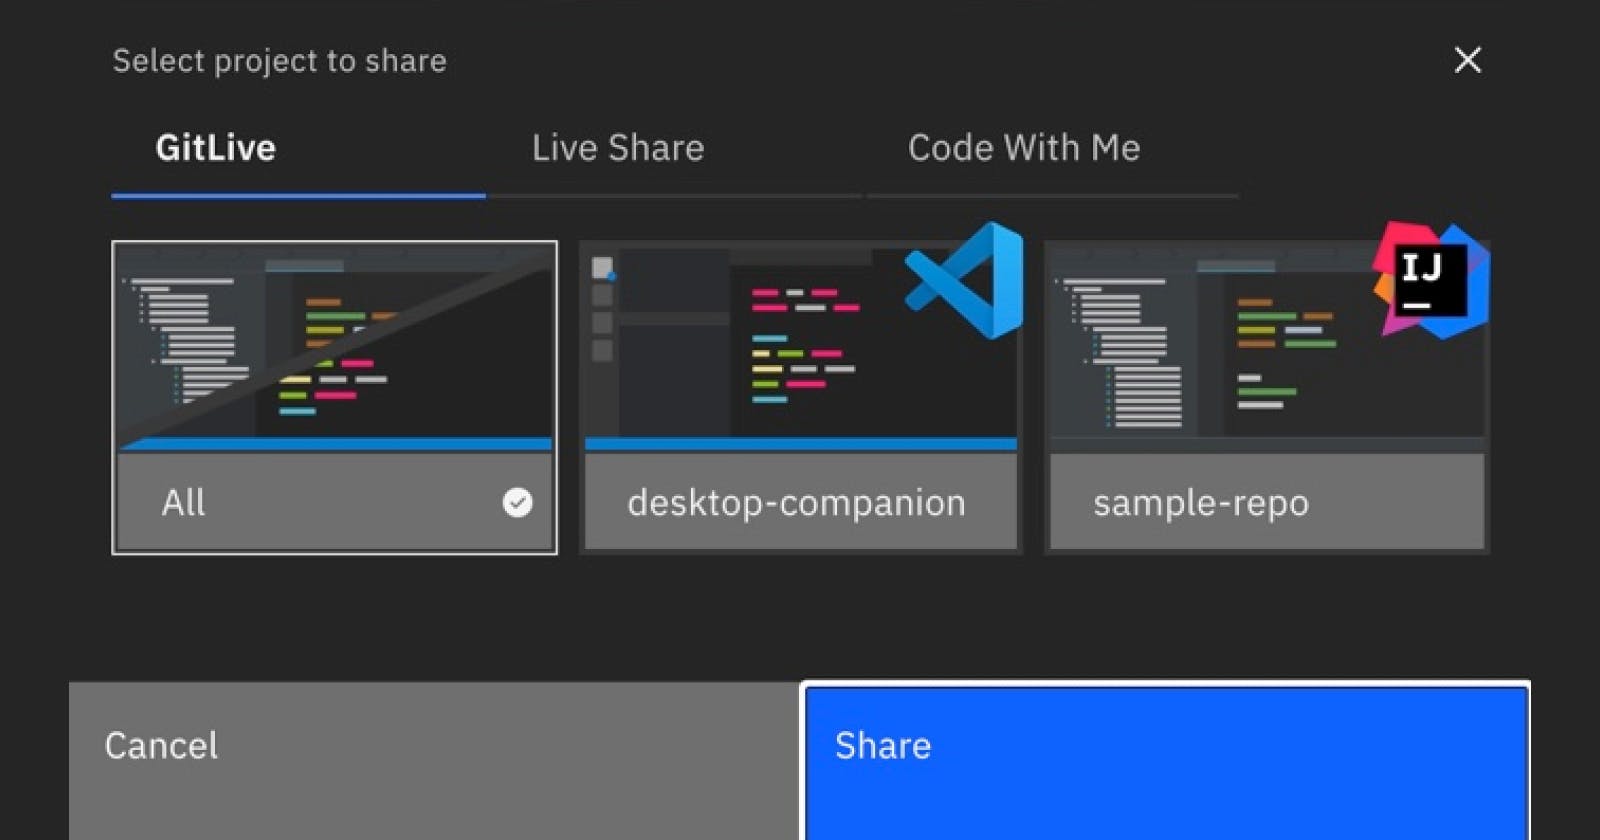 GitLive 13.0: Codeshare now supports sharing via Live Share and Code With Me